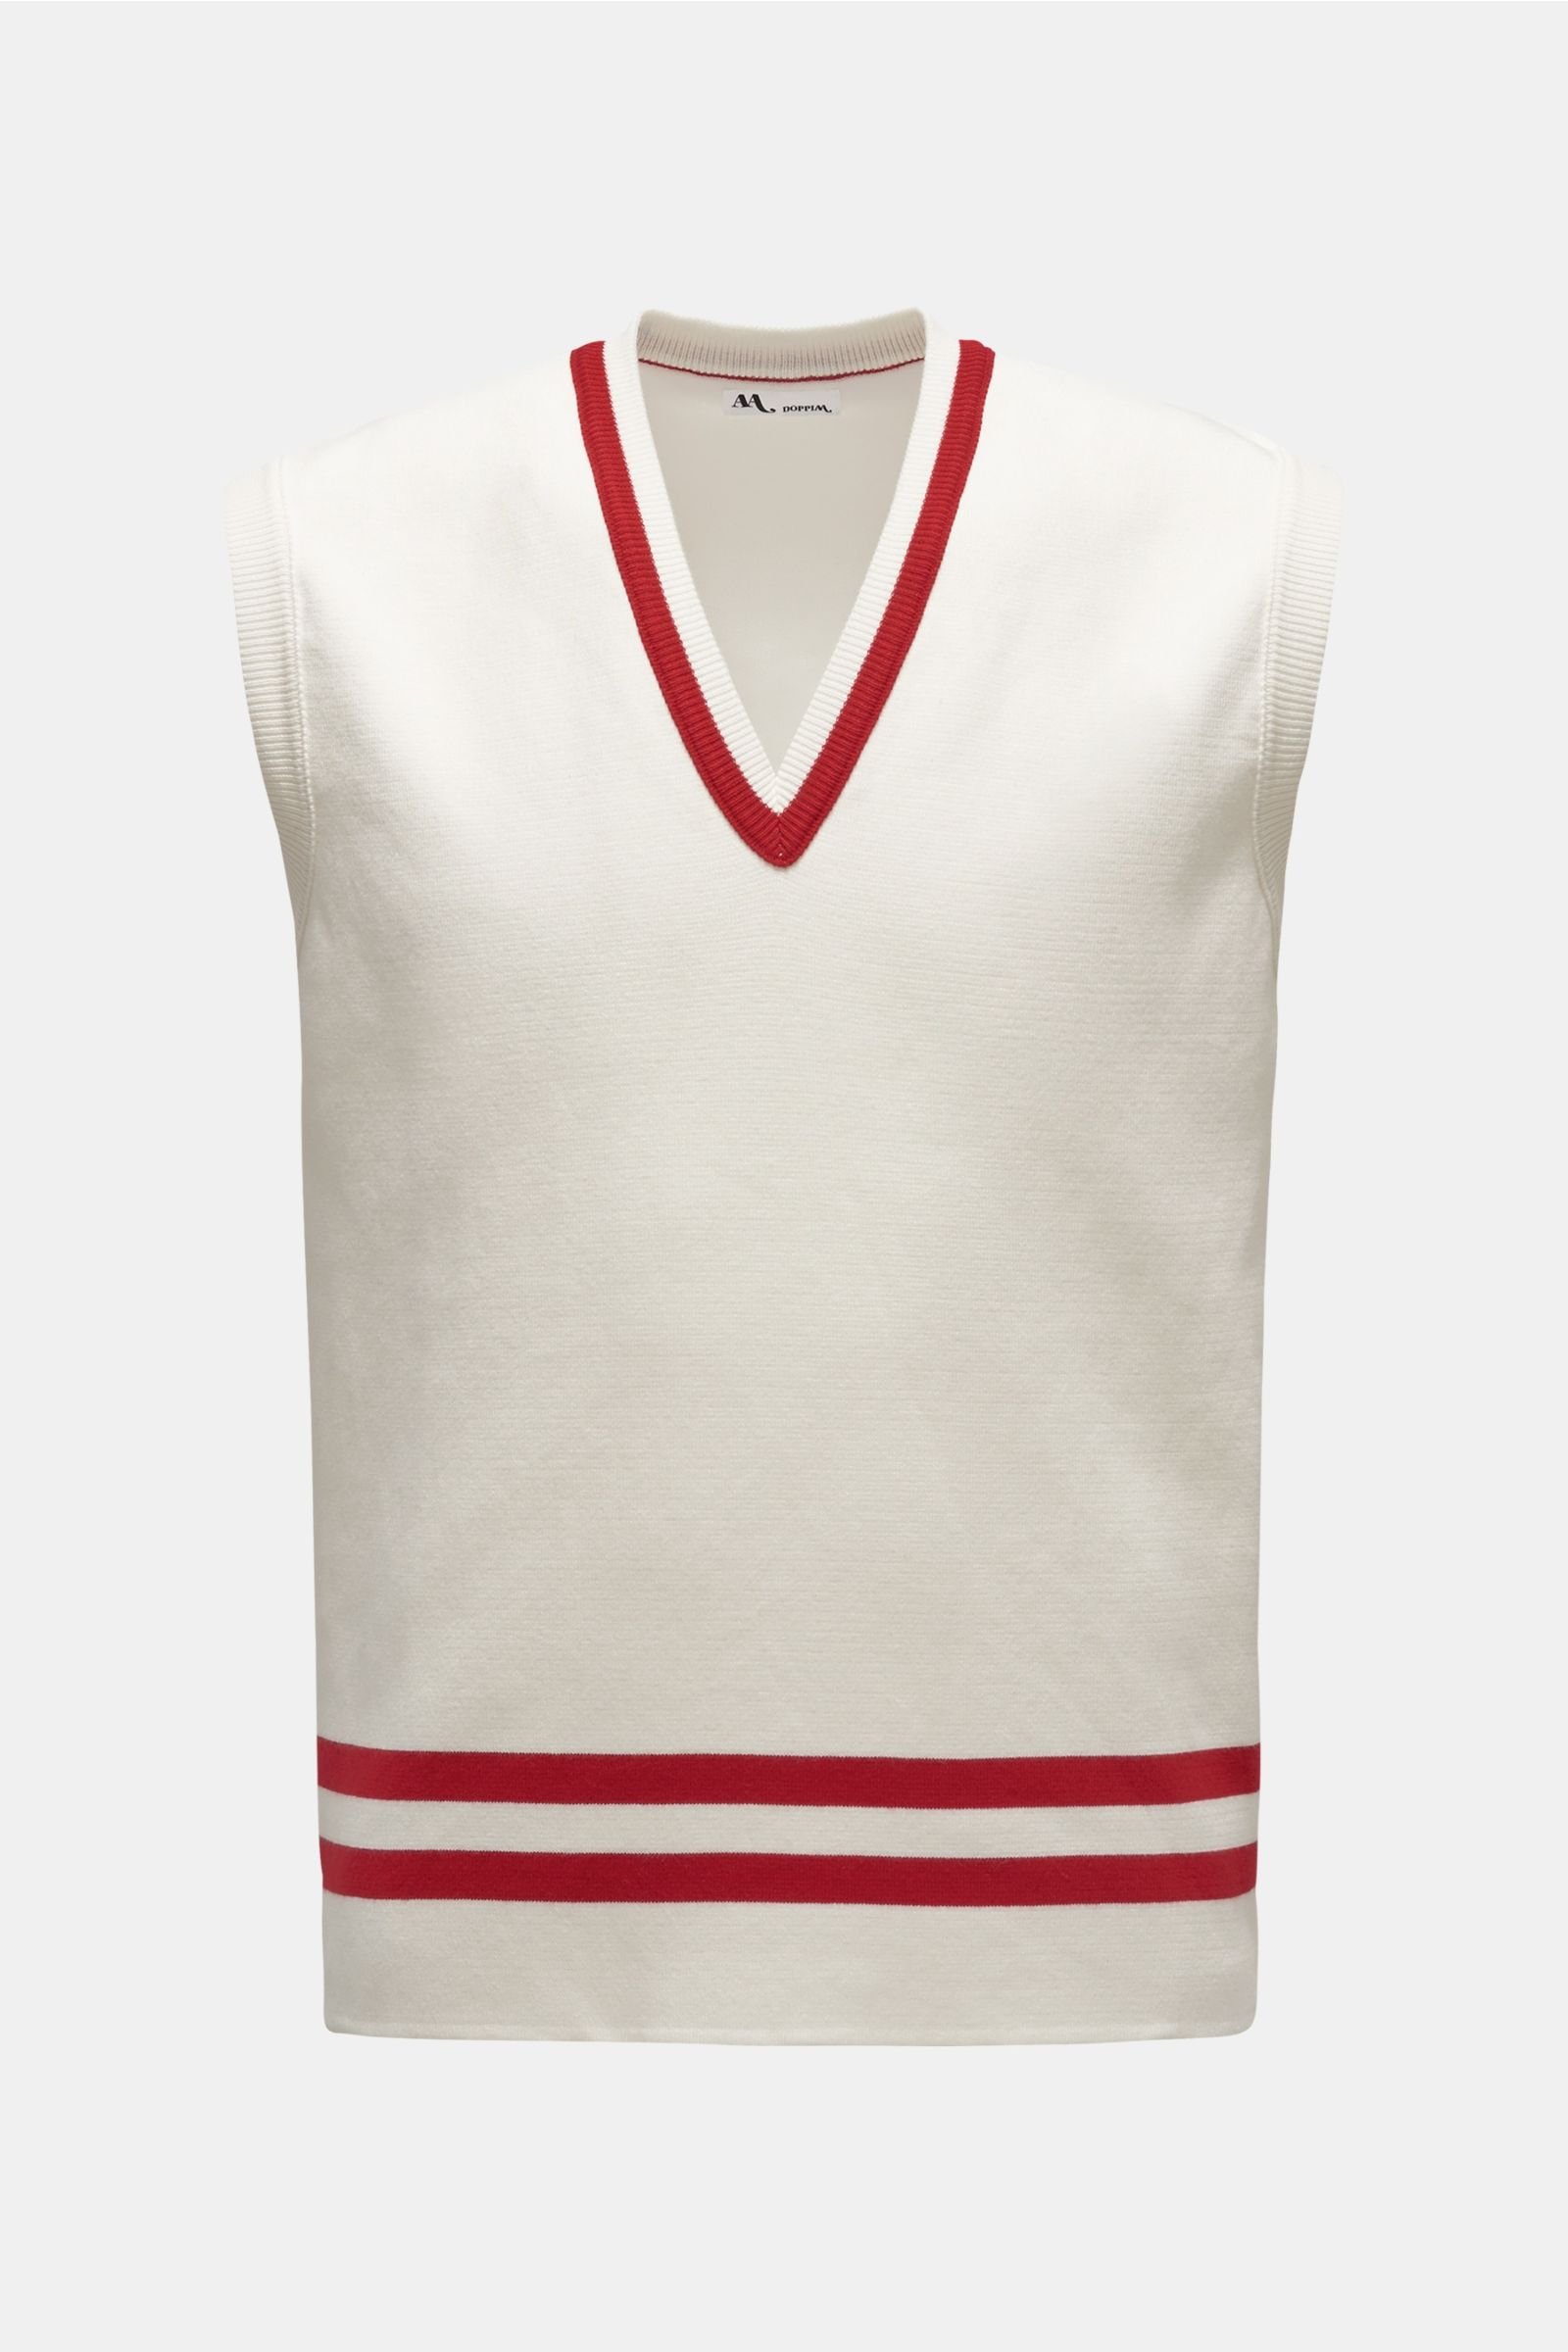 V-neck sweater vest 'Aarnica/t' off-white/red